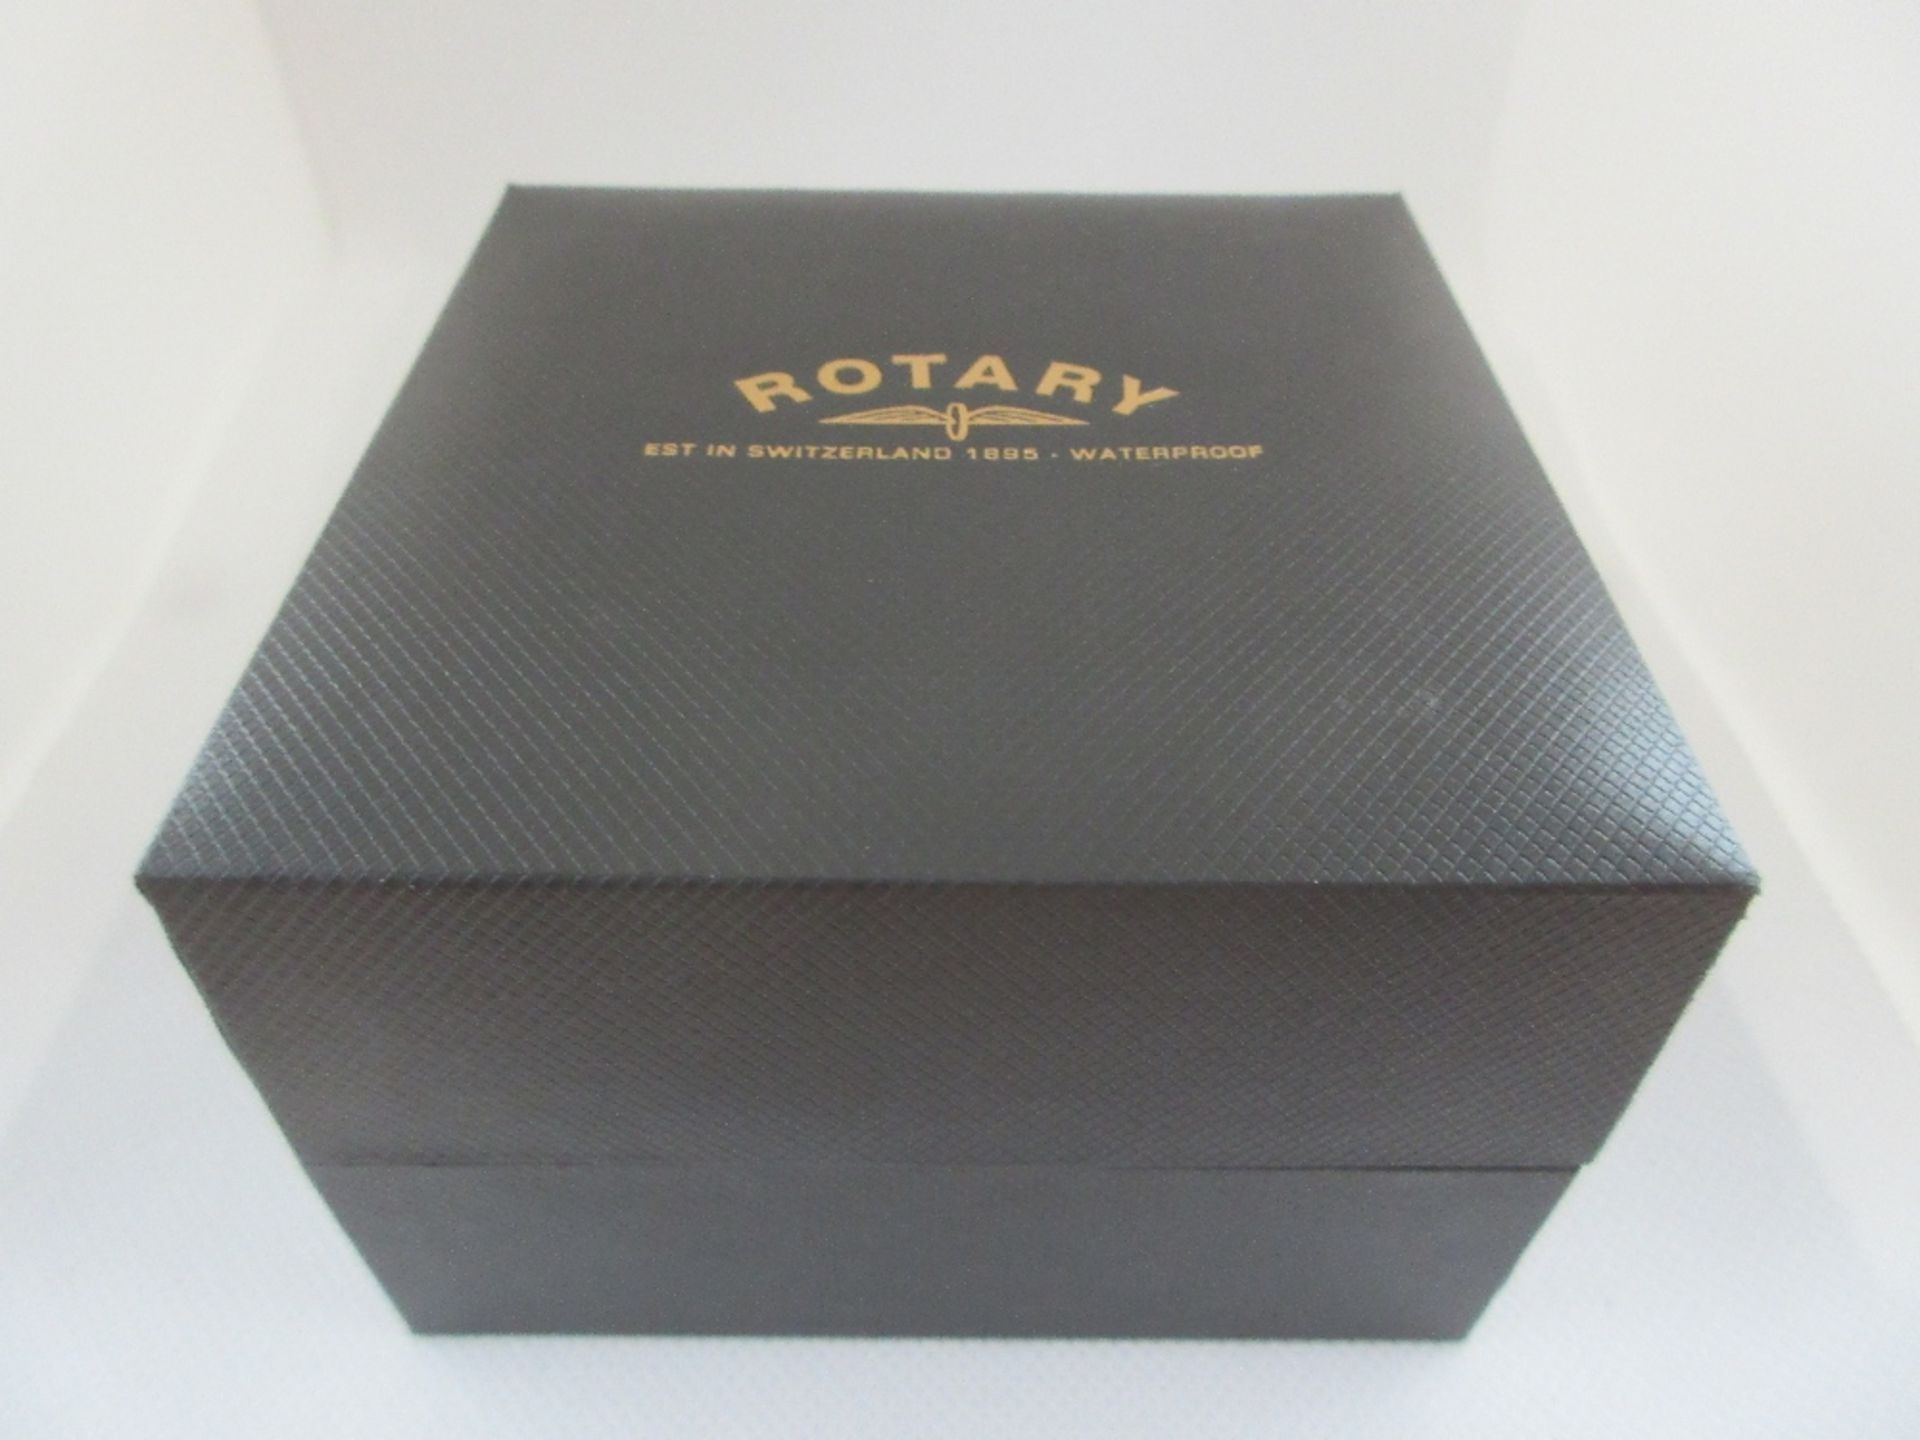 ROTARY MALE WATCH, MODEL GB102624/03, CASE DIAMETER 38MM, STAINLESS STEEL STRAP, BOXED, RRP £ 179 - Image 4 of 4